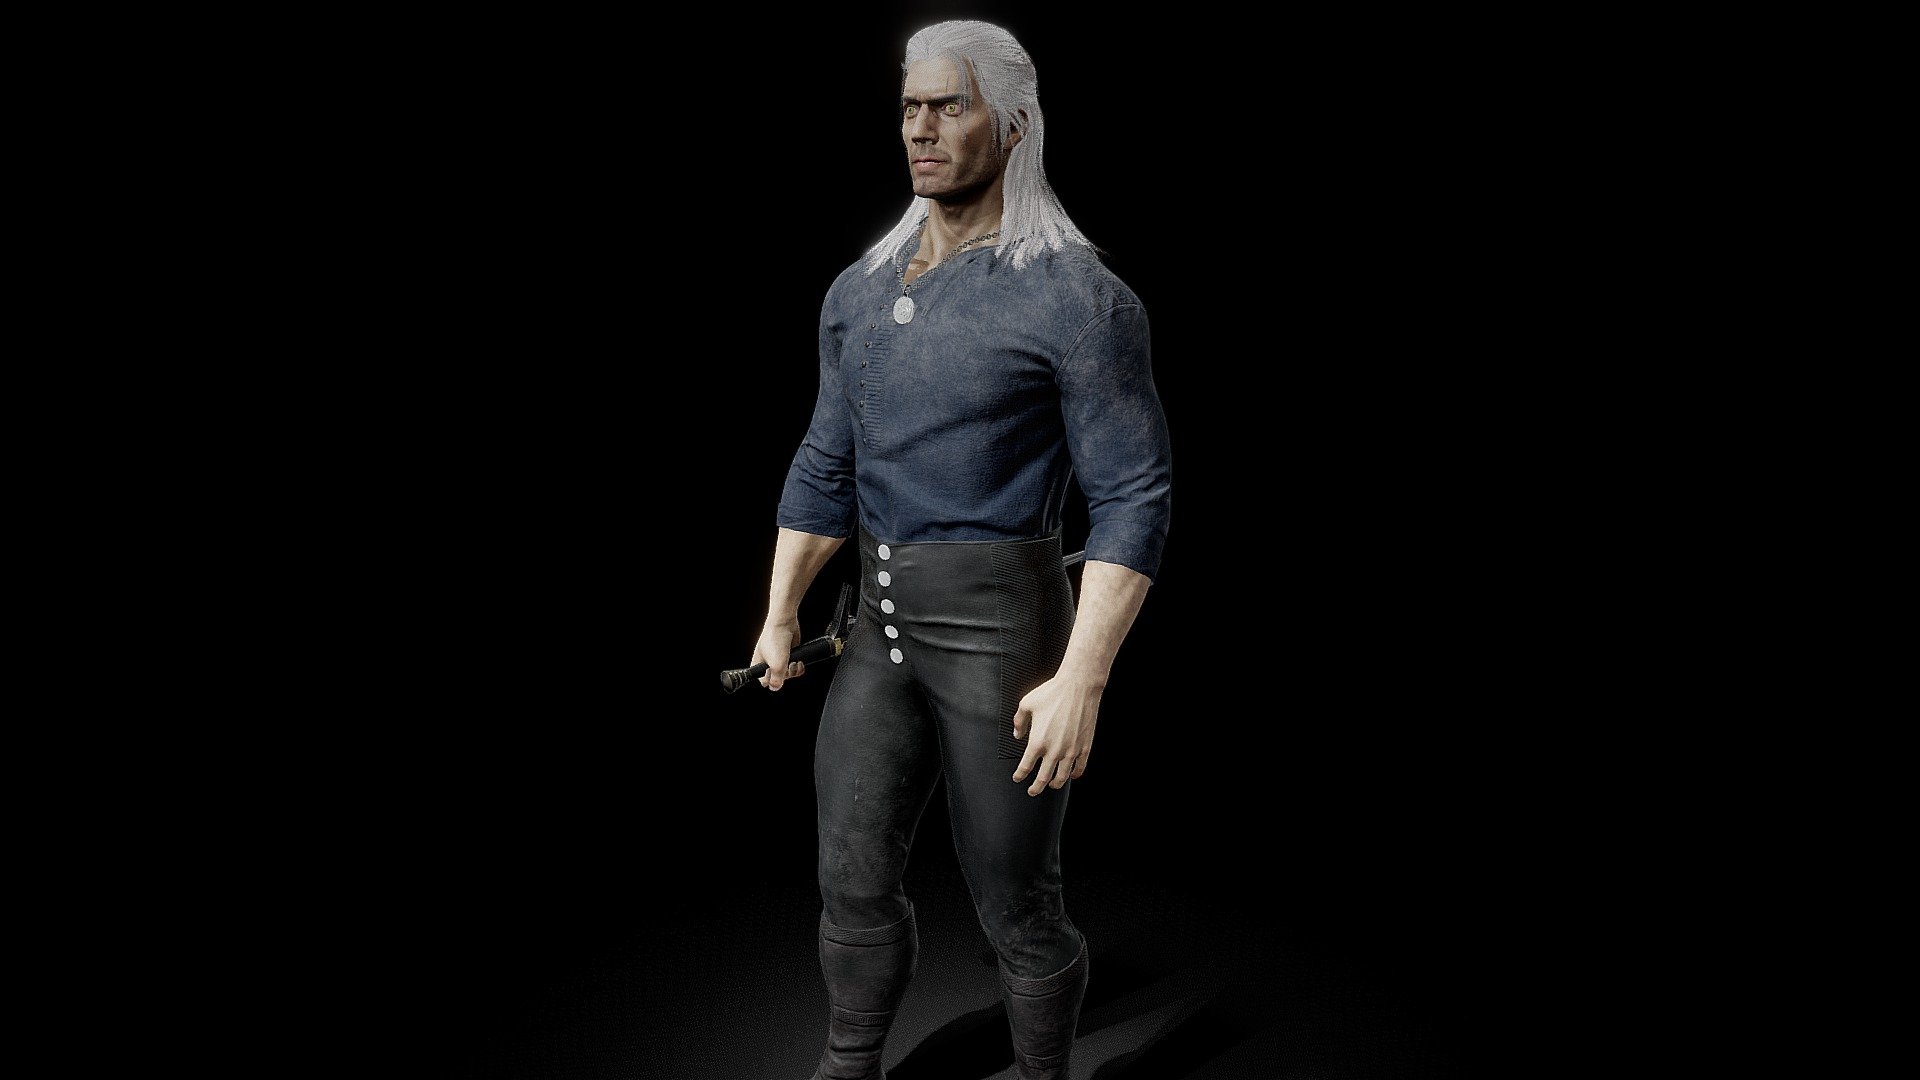 Fanart Model of The Witcher-Geralt of Rivia.
Always been a fan of the witcher games and the netflix show.
https://www.artstation.com/artwork/ArbGmN - Witcher - 3D model by Pinac_094 (@Seismic_Creations) 3d model